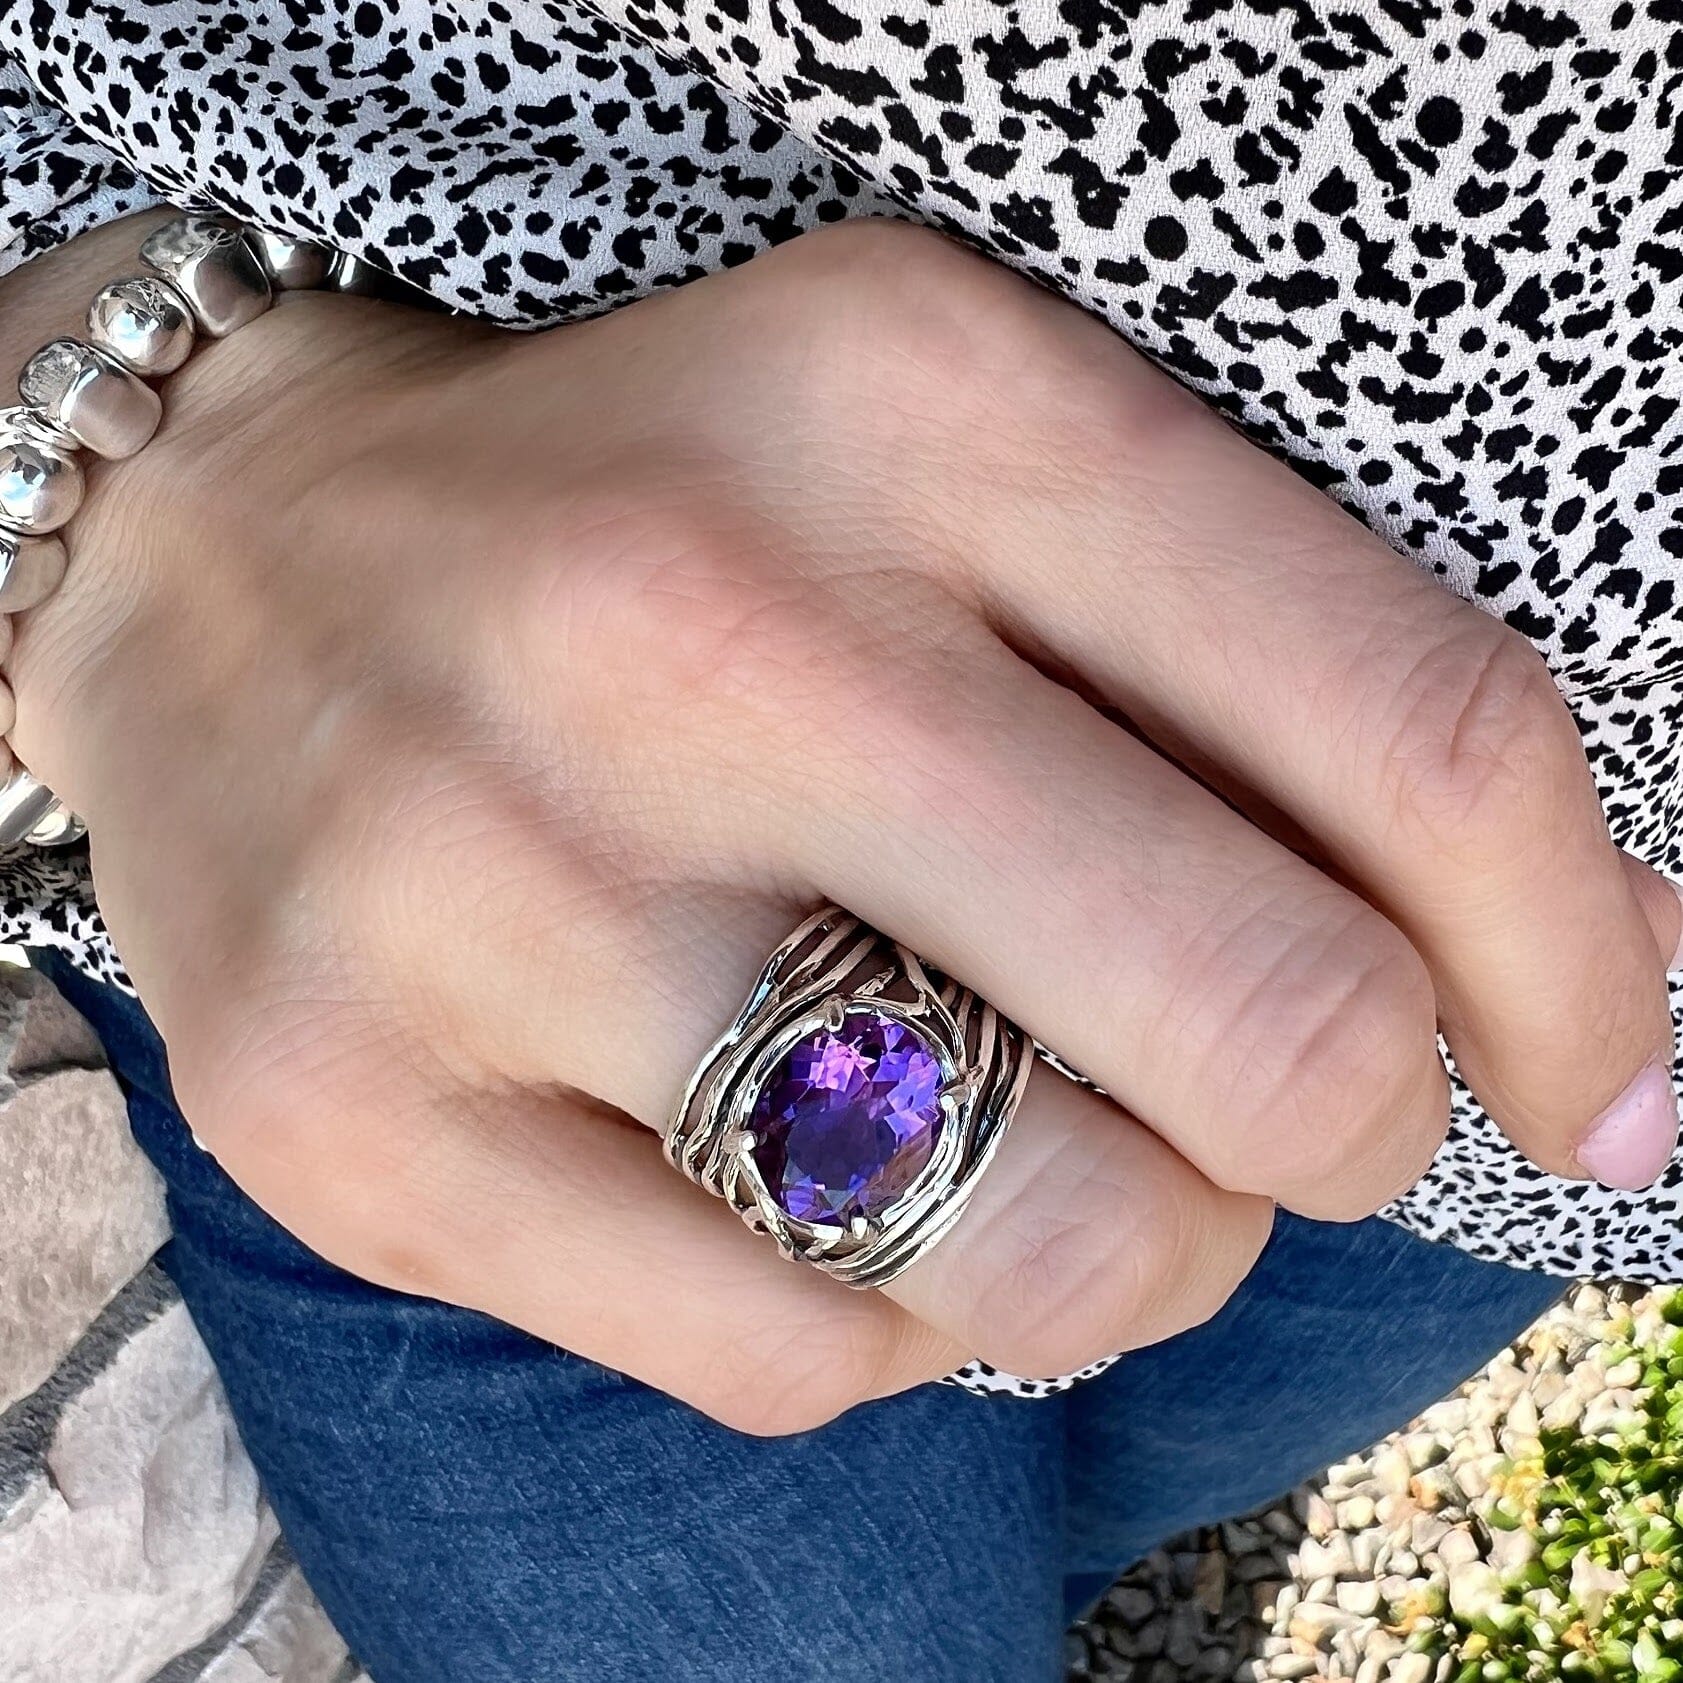 chunky sterling silver ring featuring an oval amethyst stone